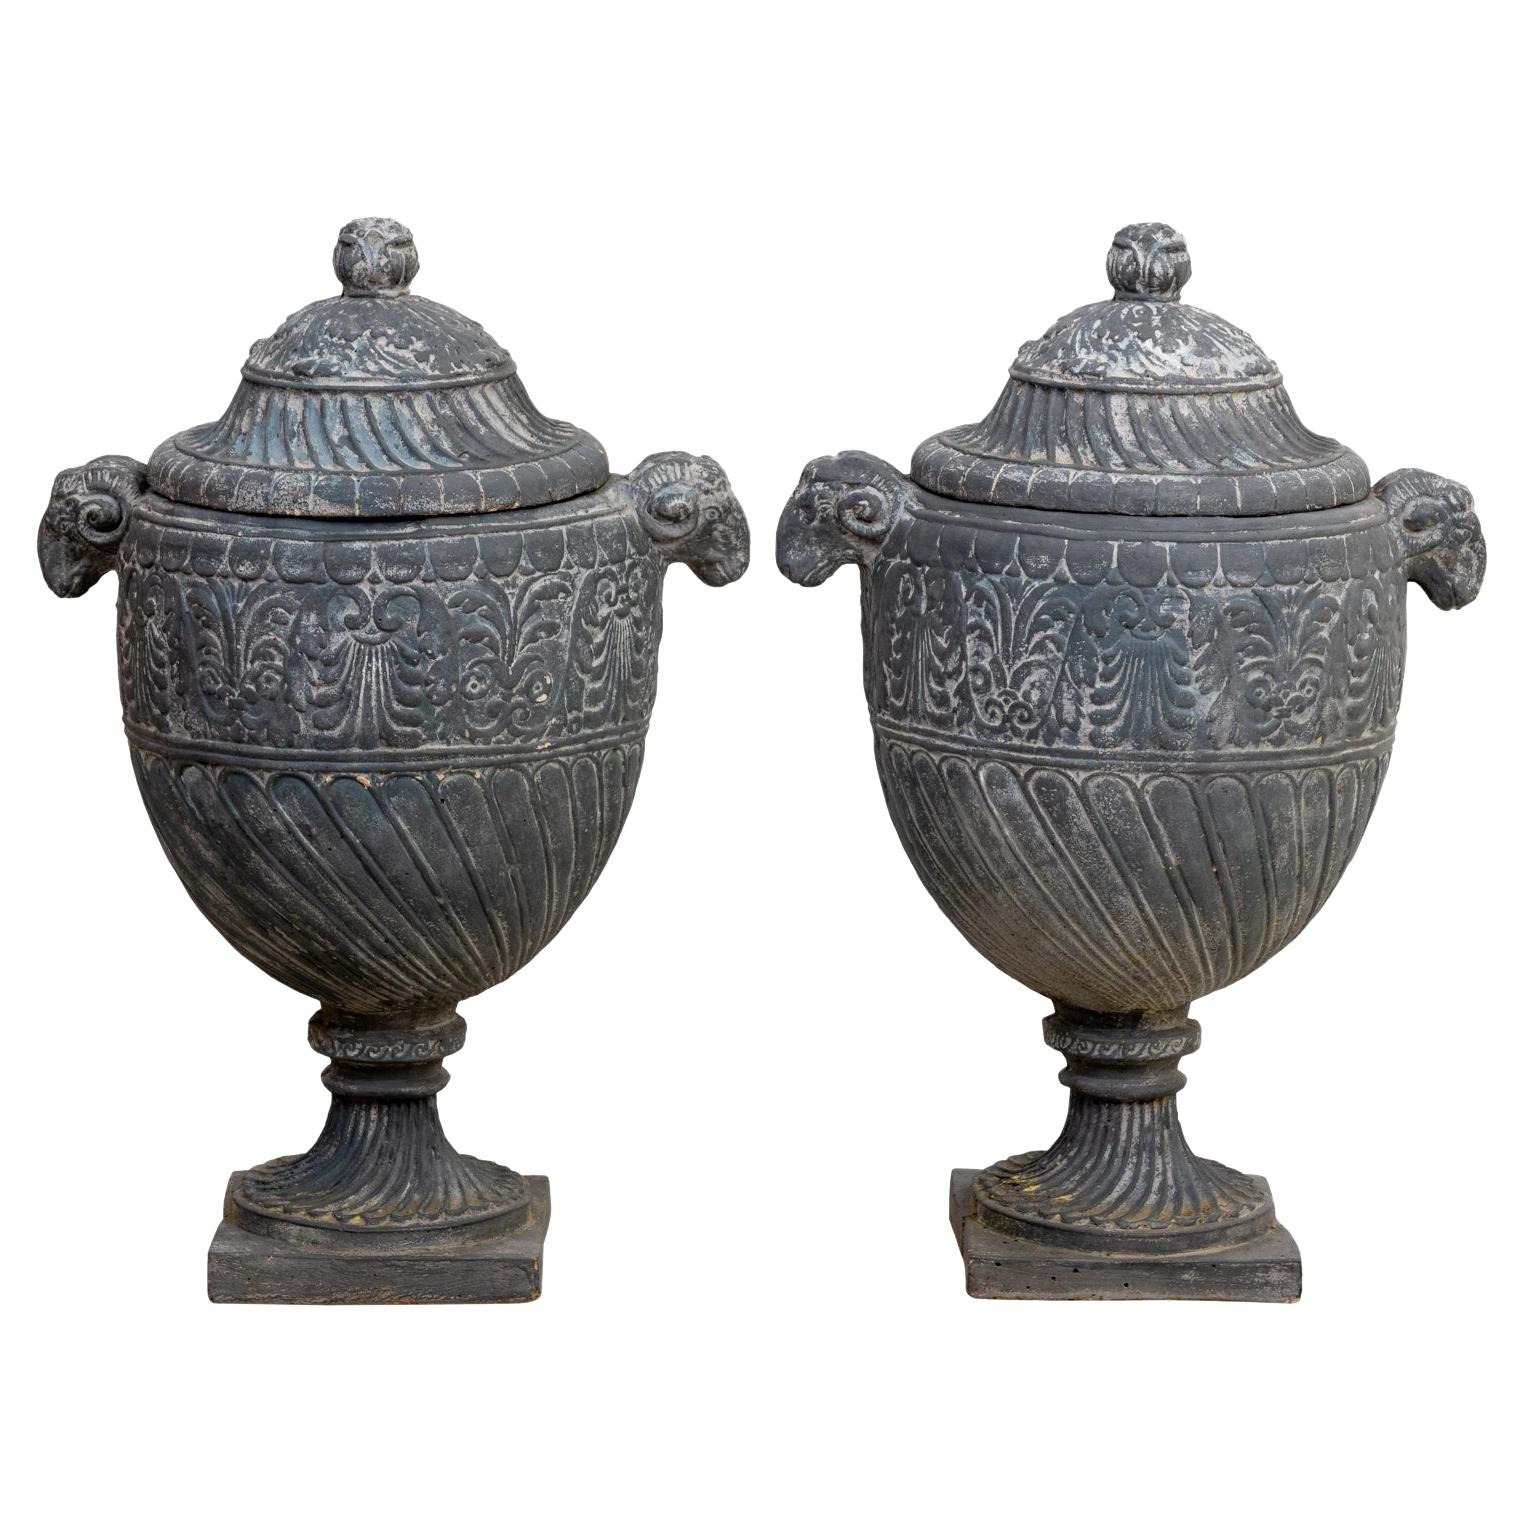 Pair of Neoclassical Style Cast Stone Urns with Lids